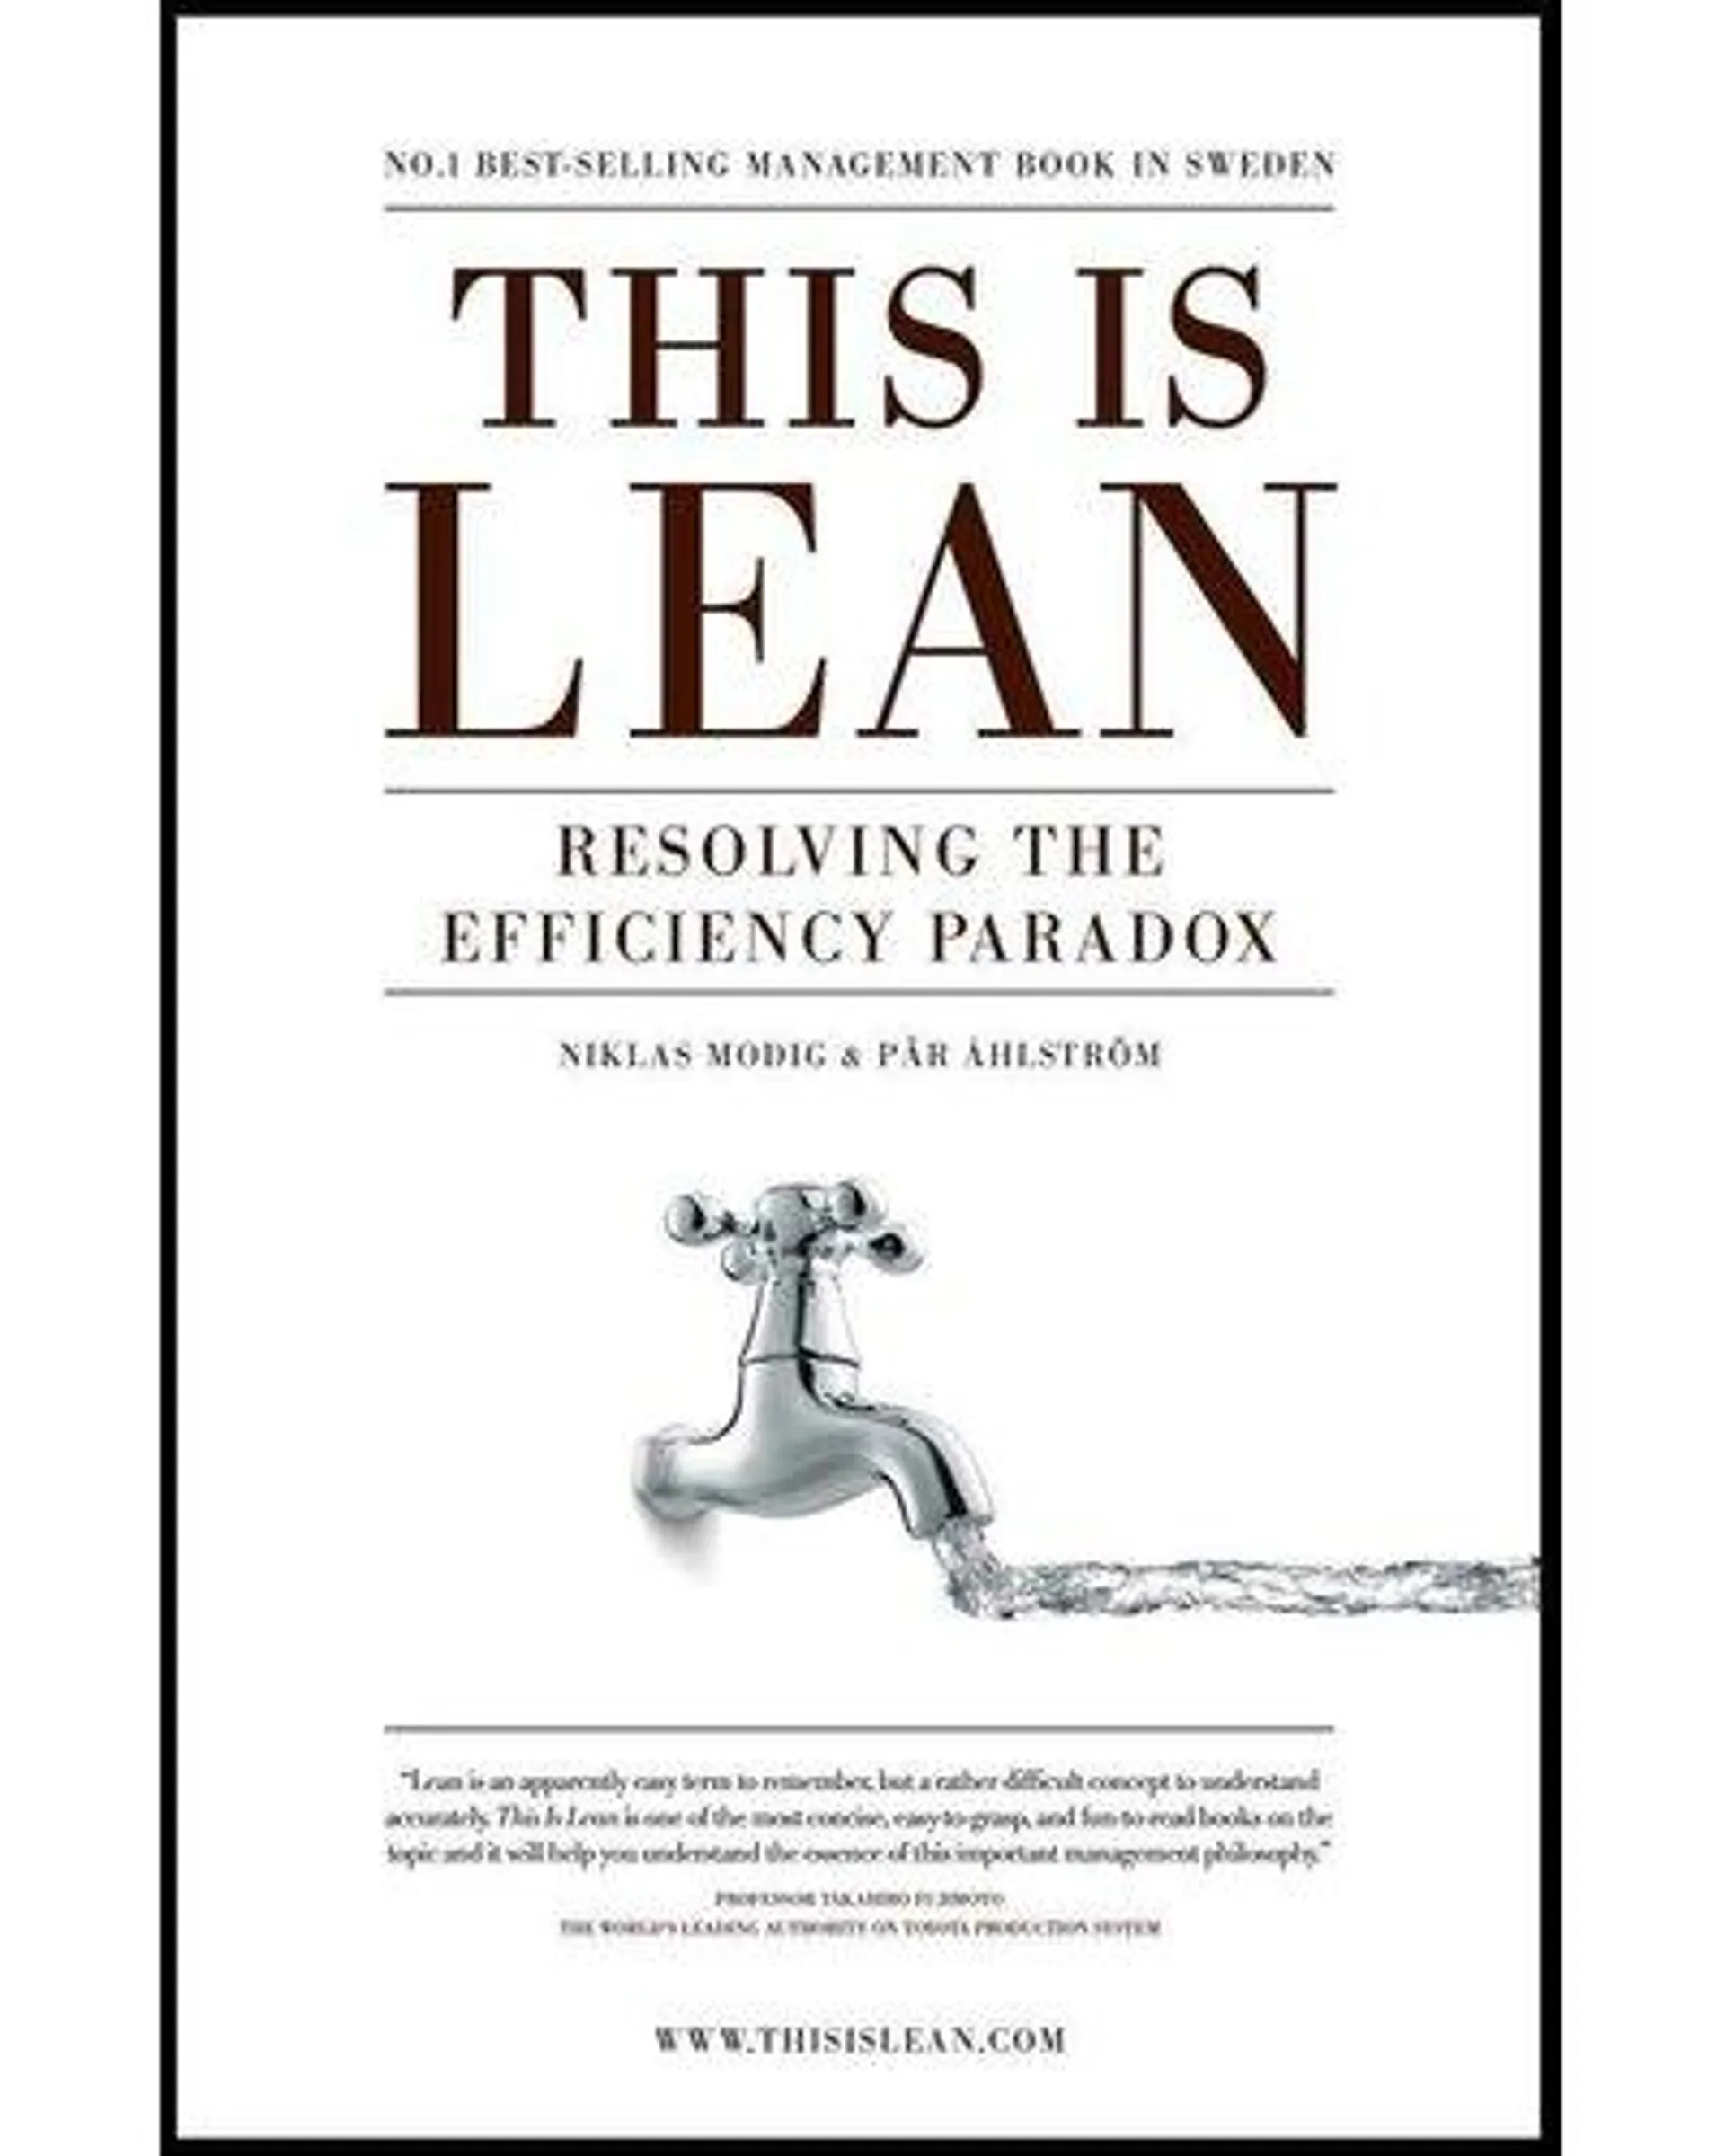 This Is Lean - Resolving The Efficiency Paradox (Paperback)